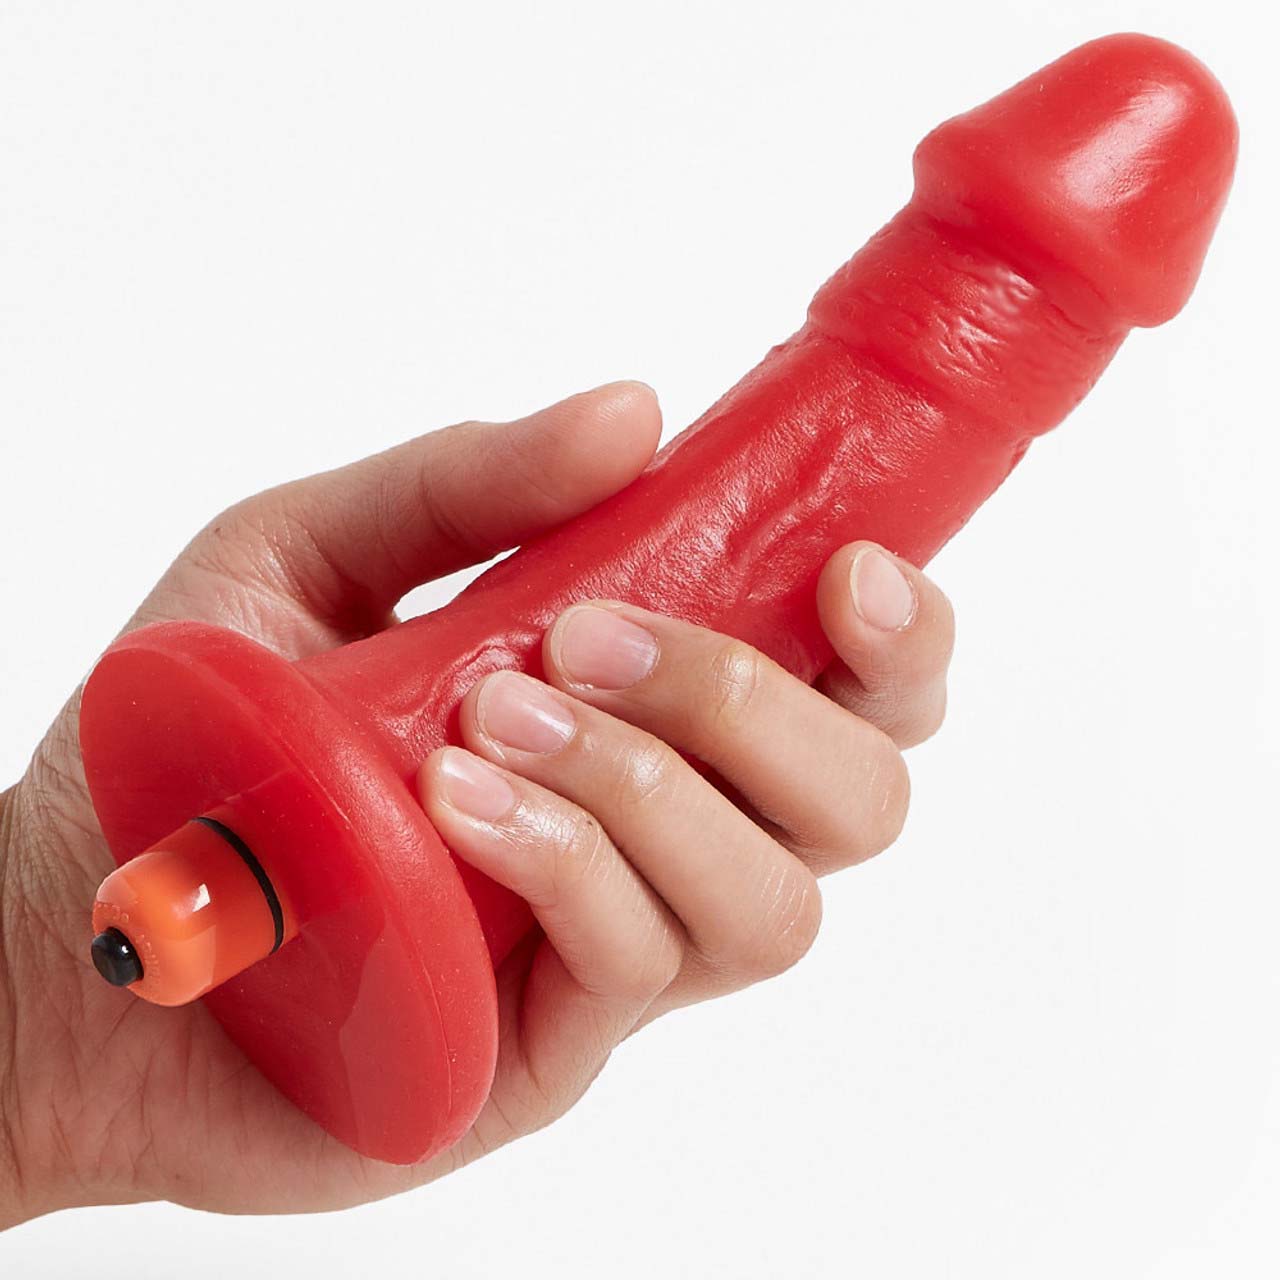 A hand holding the red Woody Silicone Dildo with vibrating bullet in it.